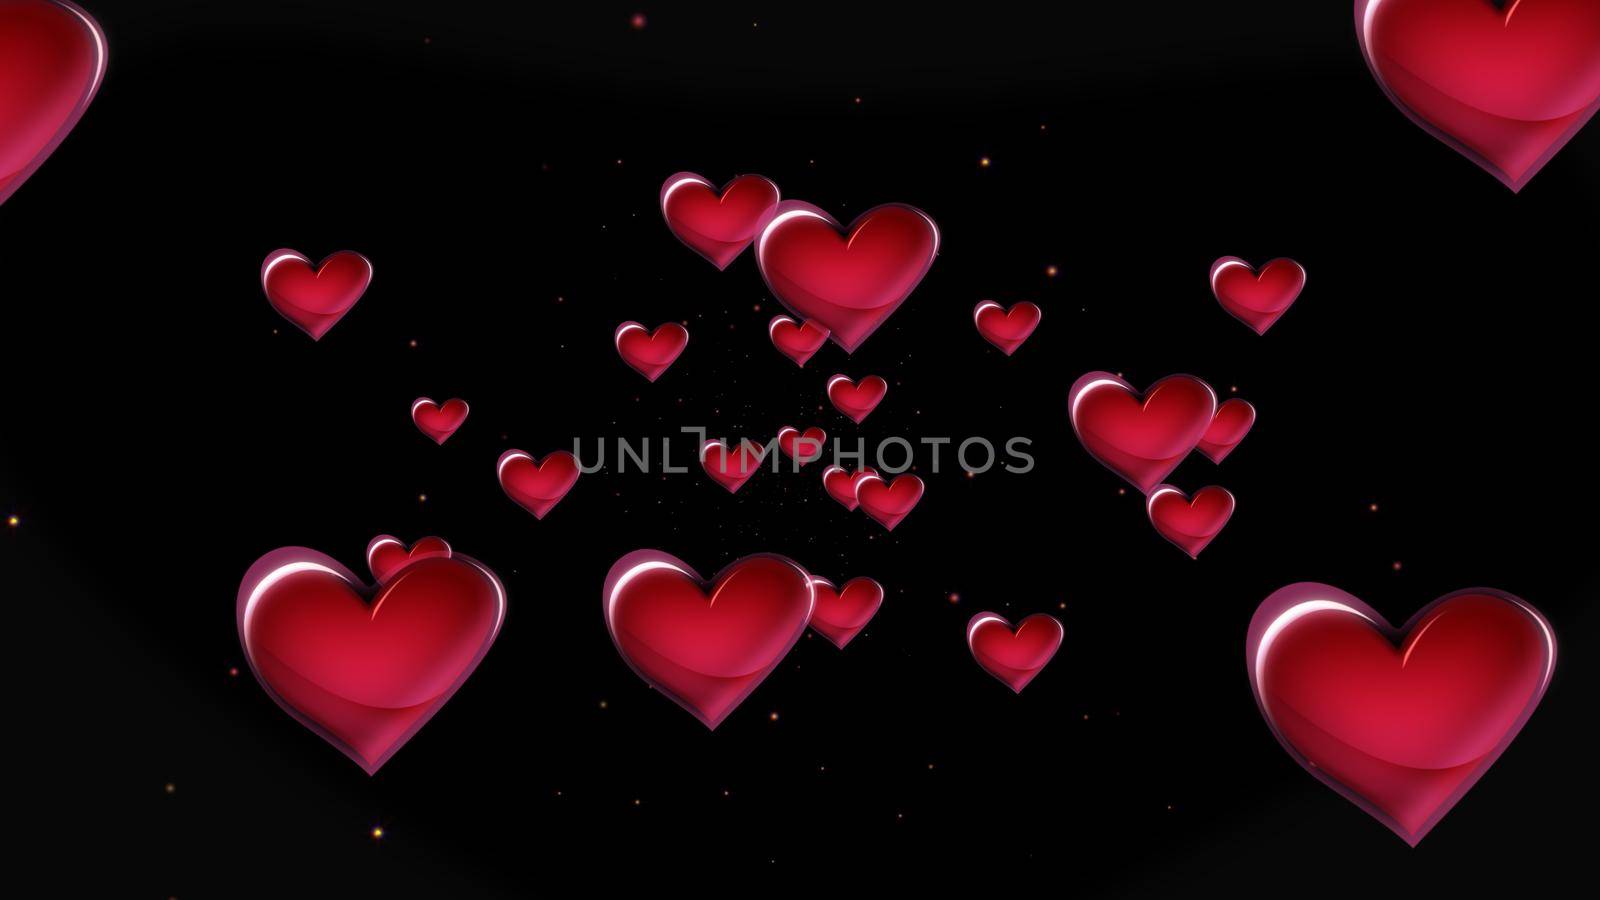 Bright red hearts abstract background, 3d render illustration